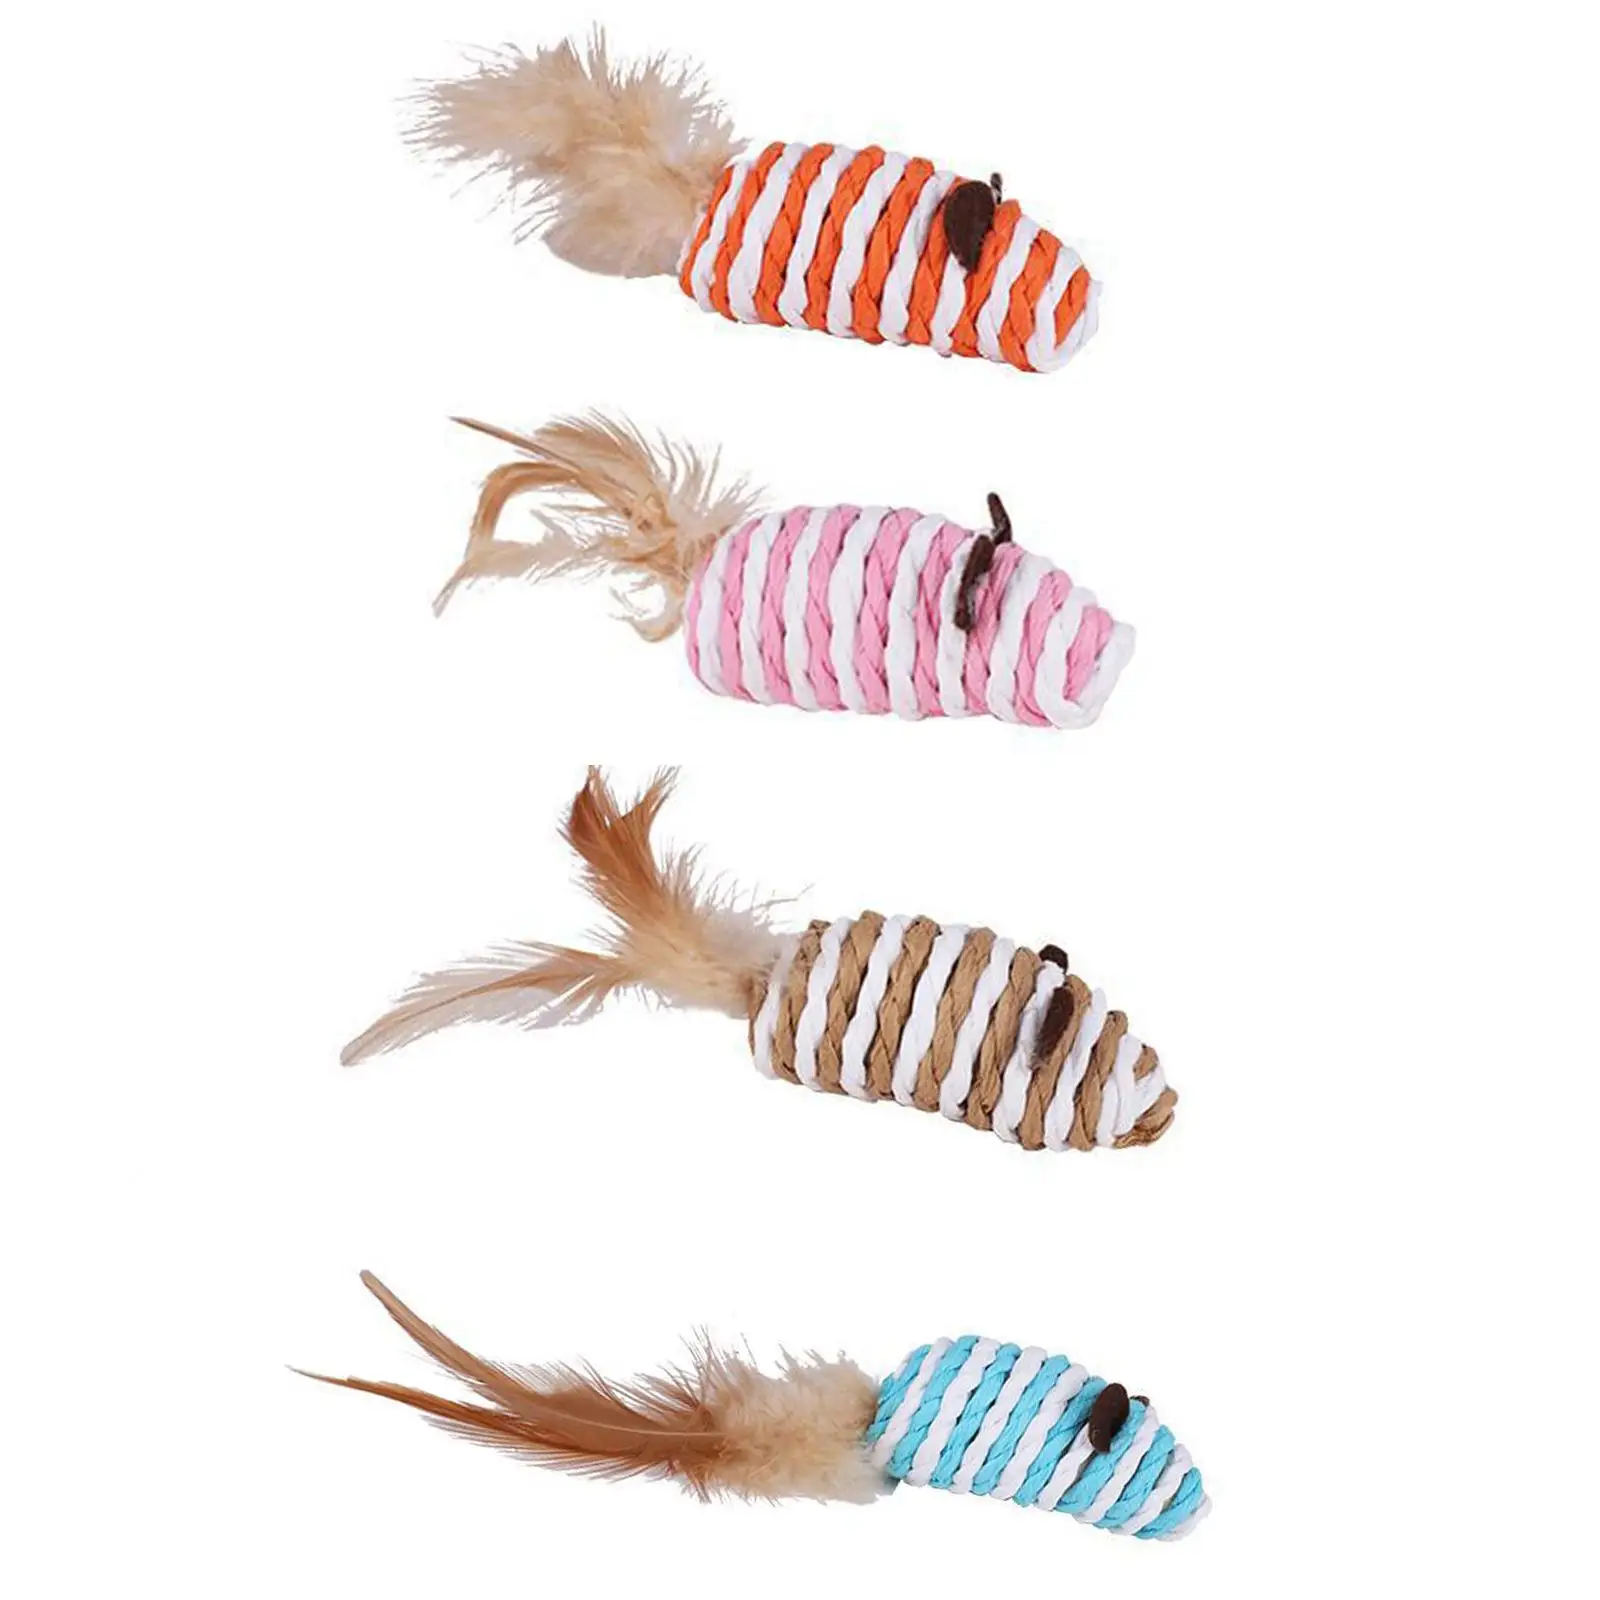 Woven False Mice Cat Toys Little Mice Size Paper Rope Small Durable Pets Toys for Interactive Play Fetch Pets Training Kitten